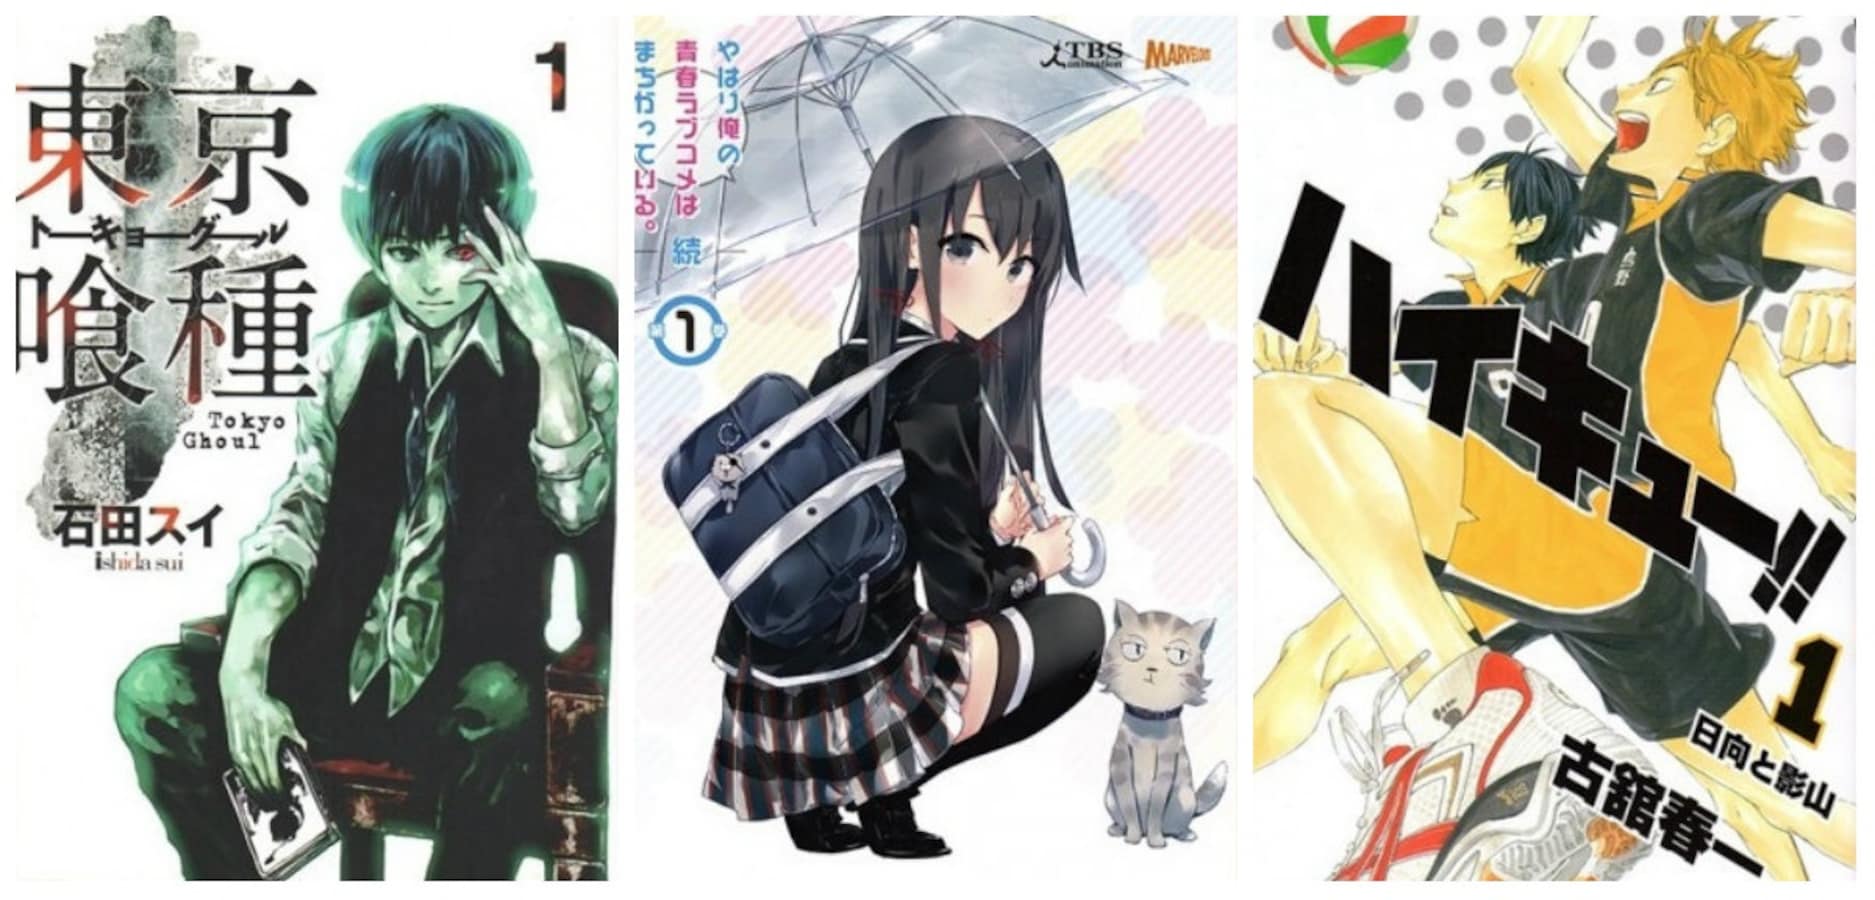 Top 5 Recommended Manga & Anime of 2016 | All About Japan